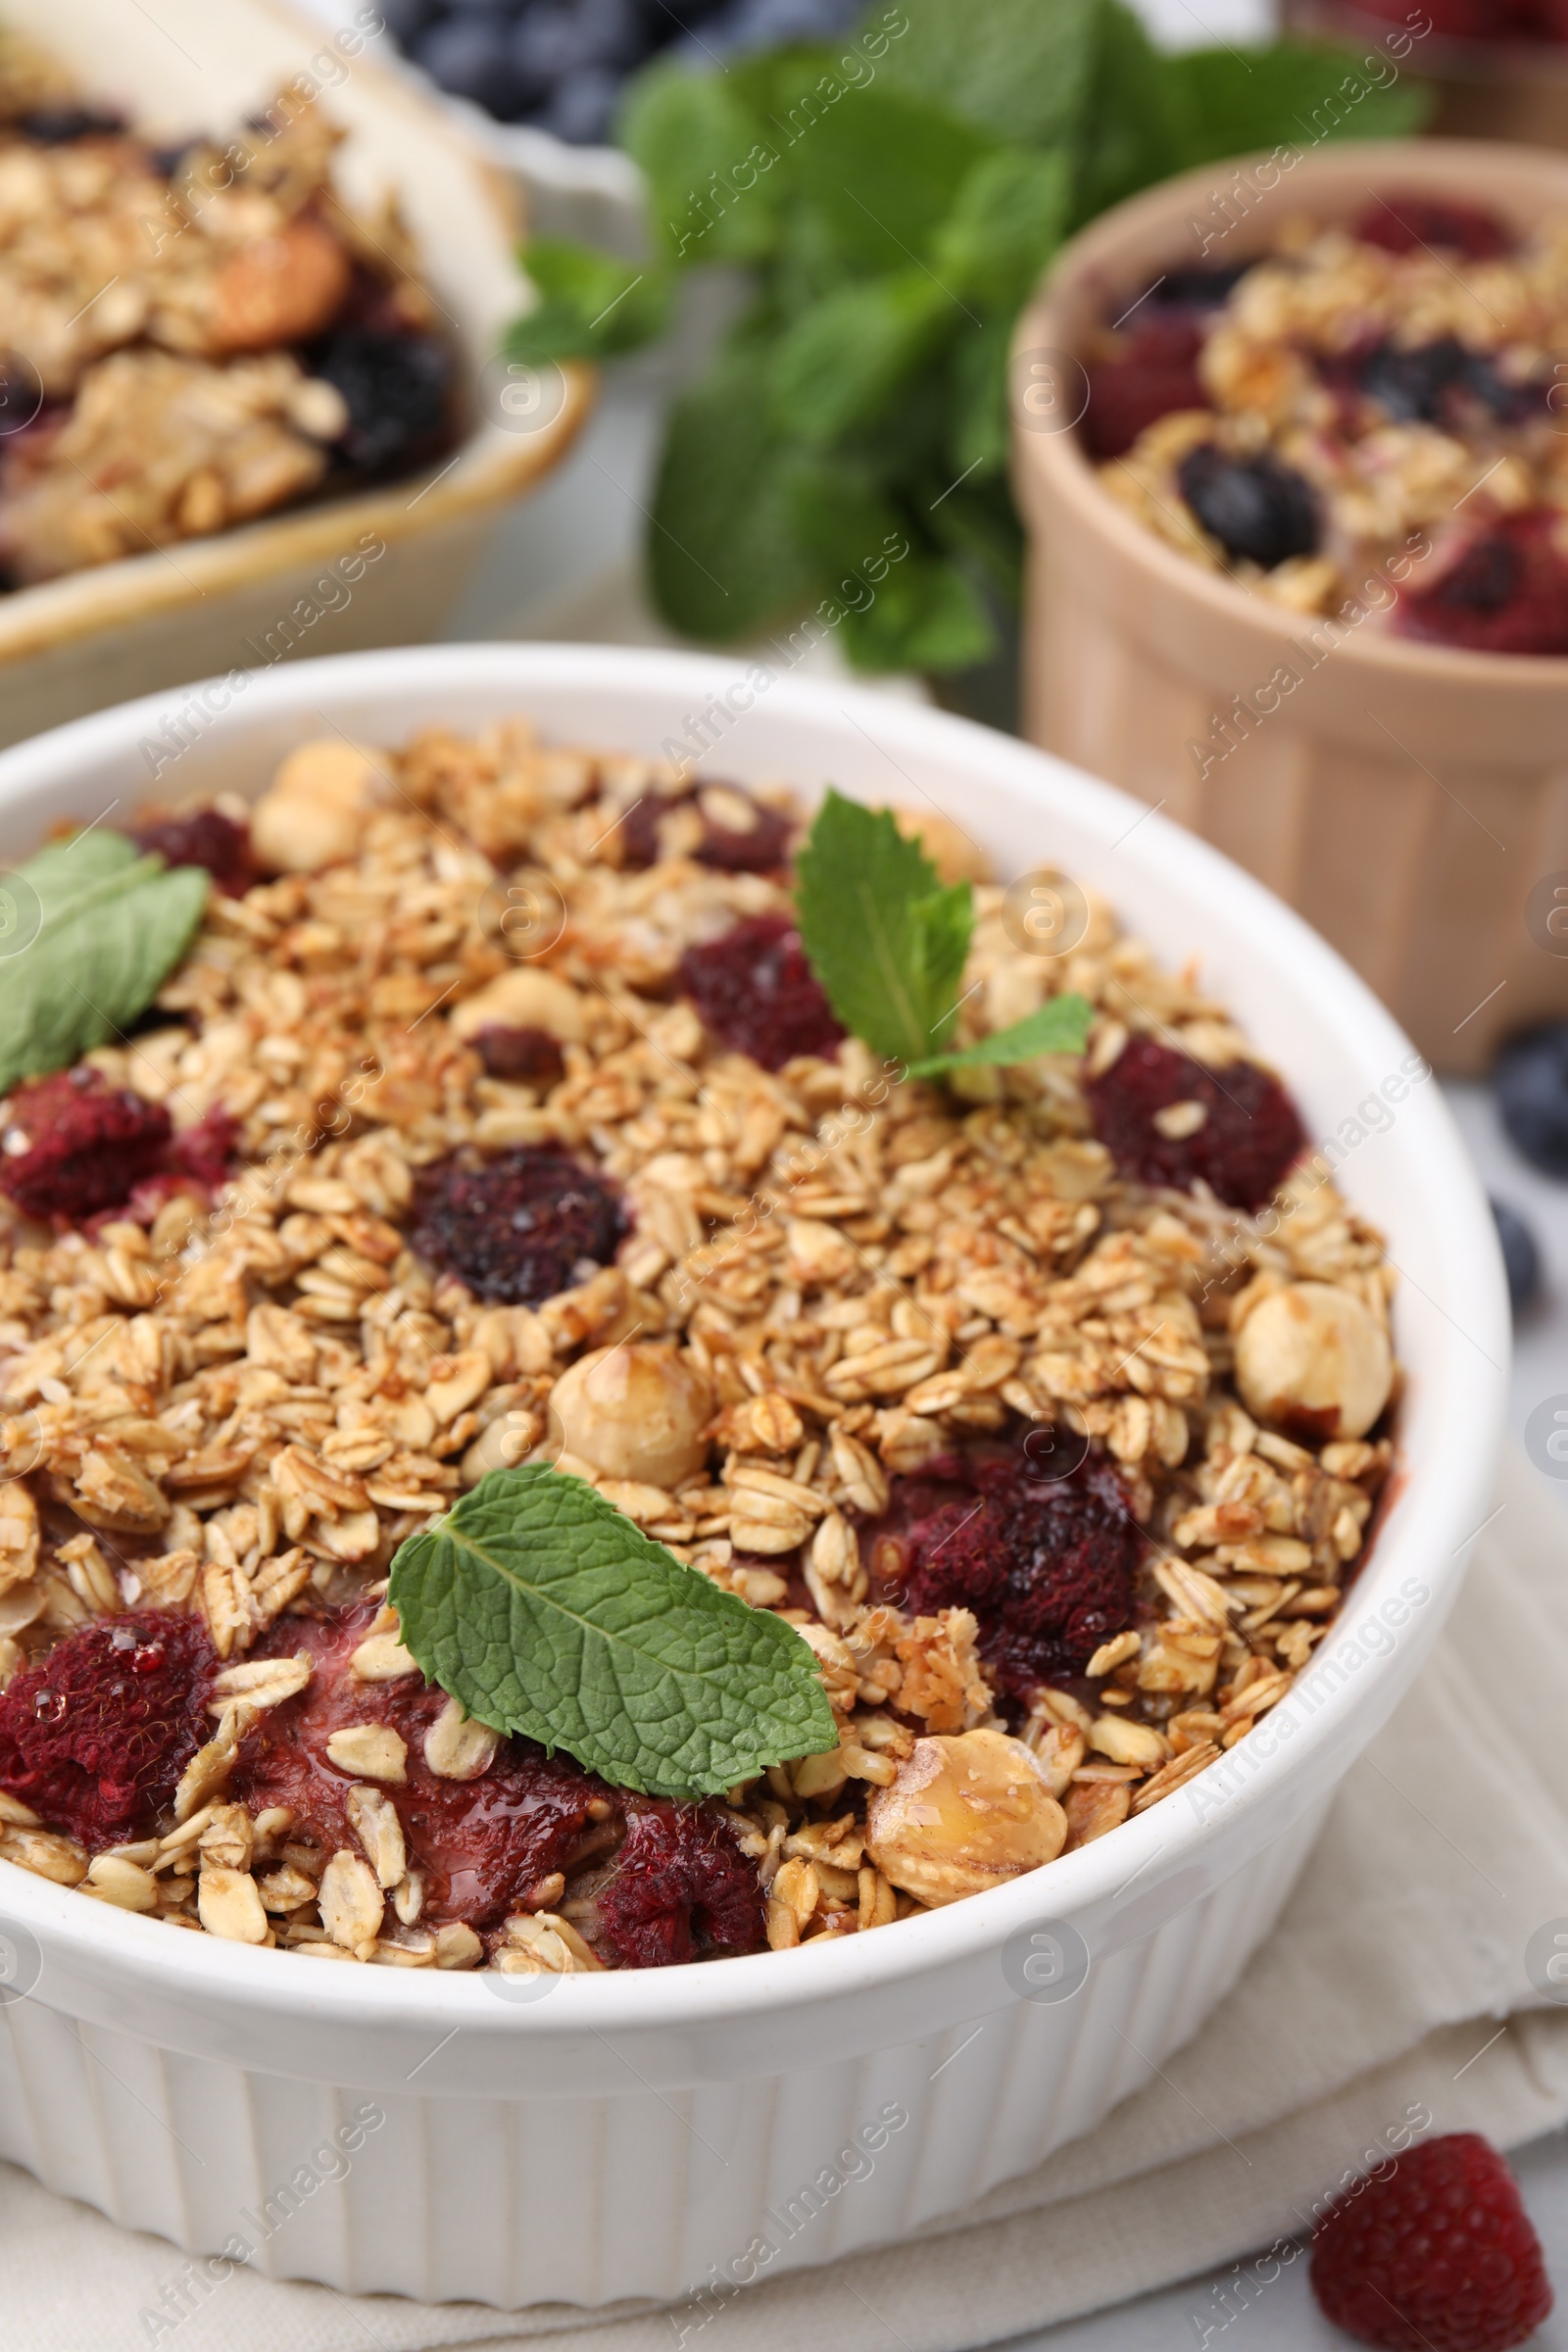 Photo of Tasty baked oatmeal with berries and nuts on table, closeup